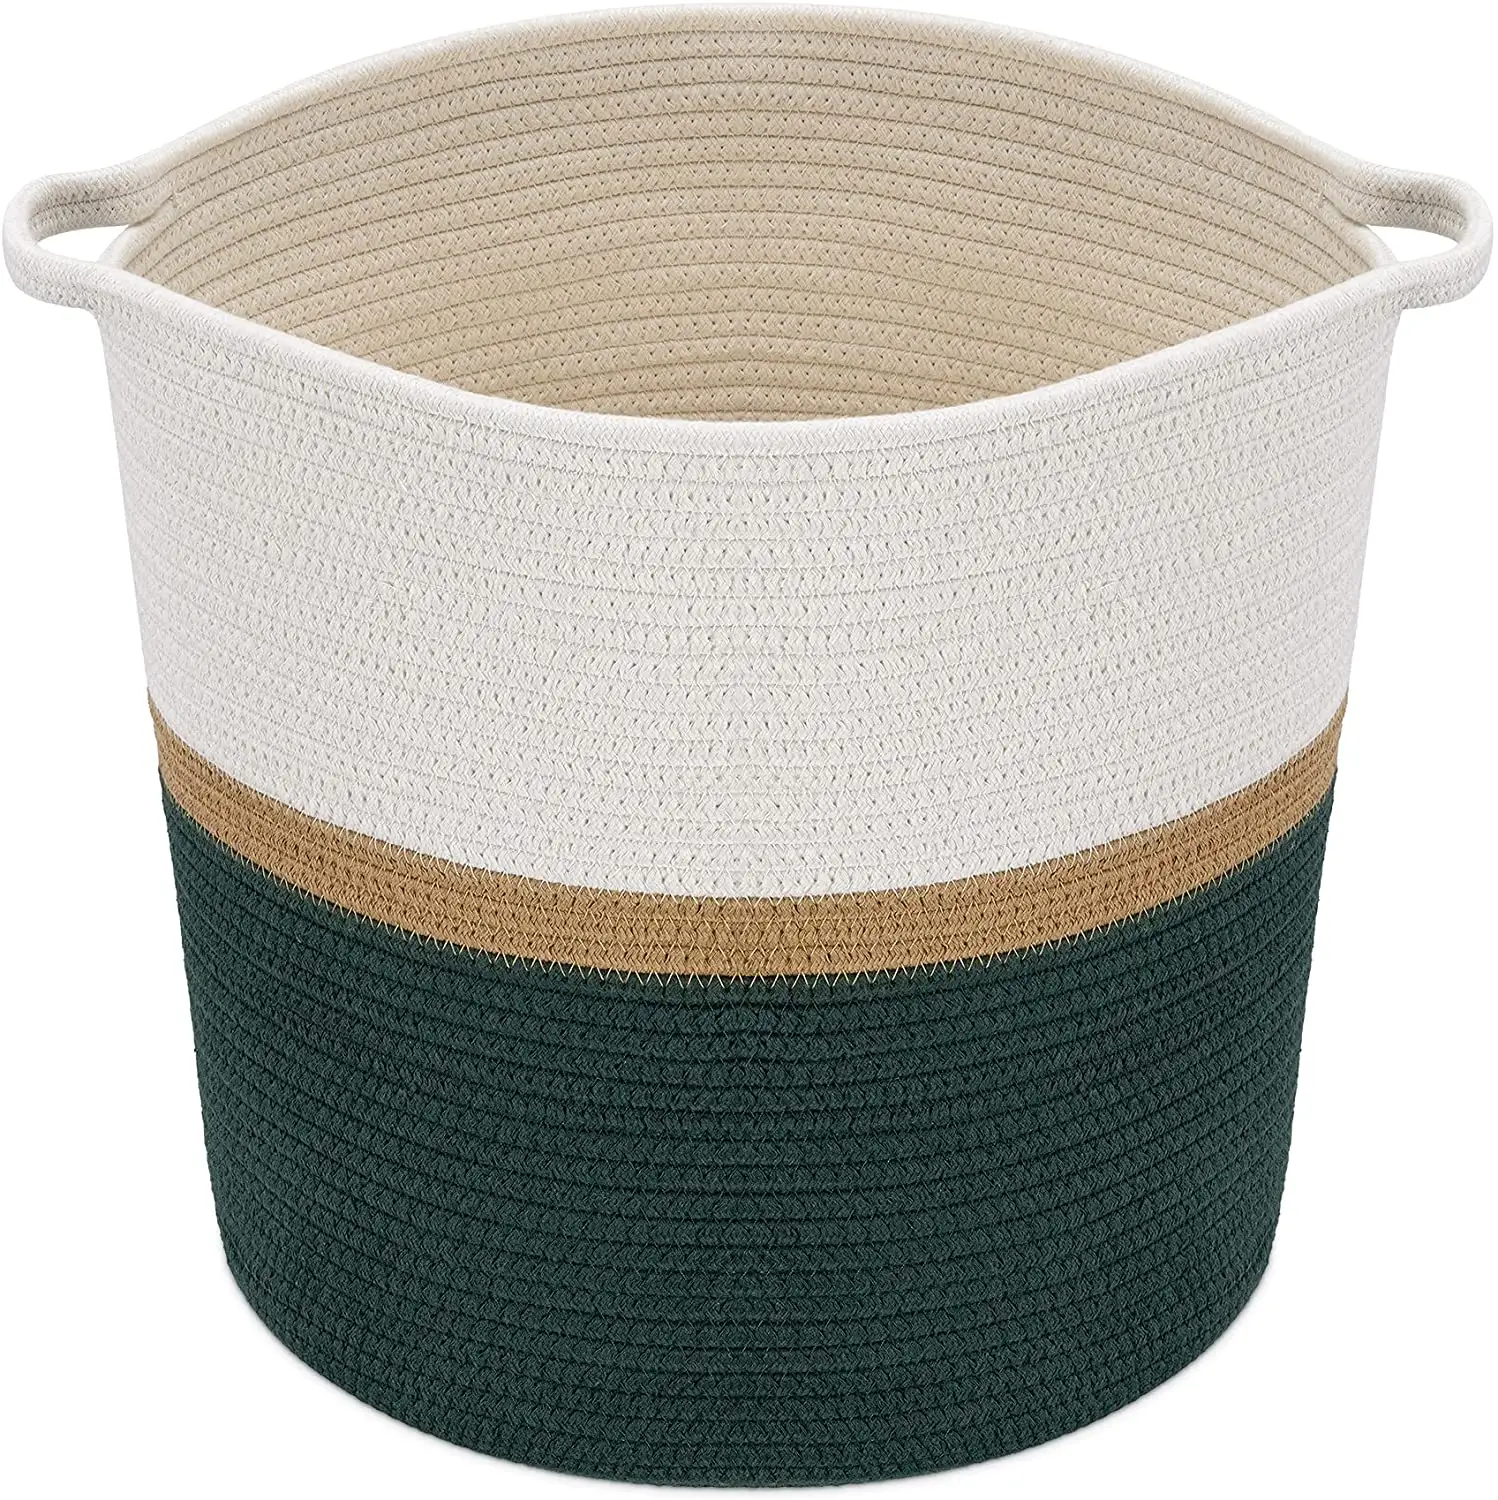 Custom Large Size 17.7" Diameter X 15" Height Cotton Rope Basket With Handles For Laundry Blankets - Dark Green Woven Storage B